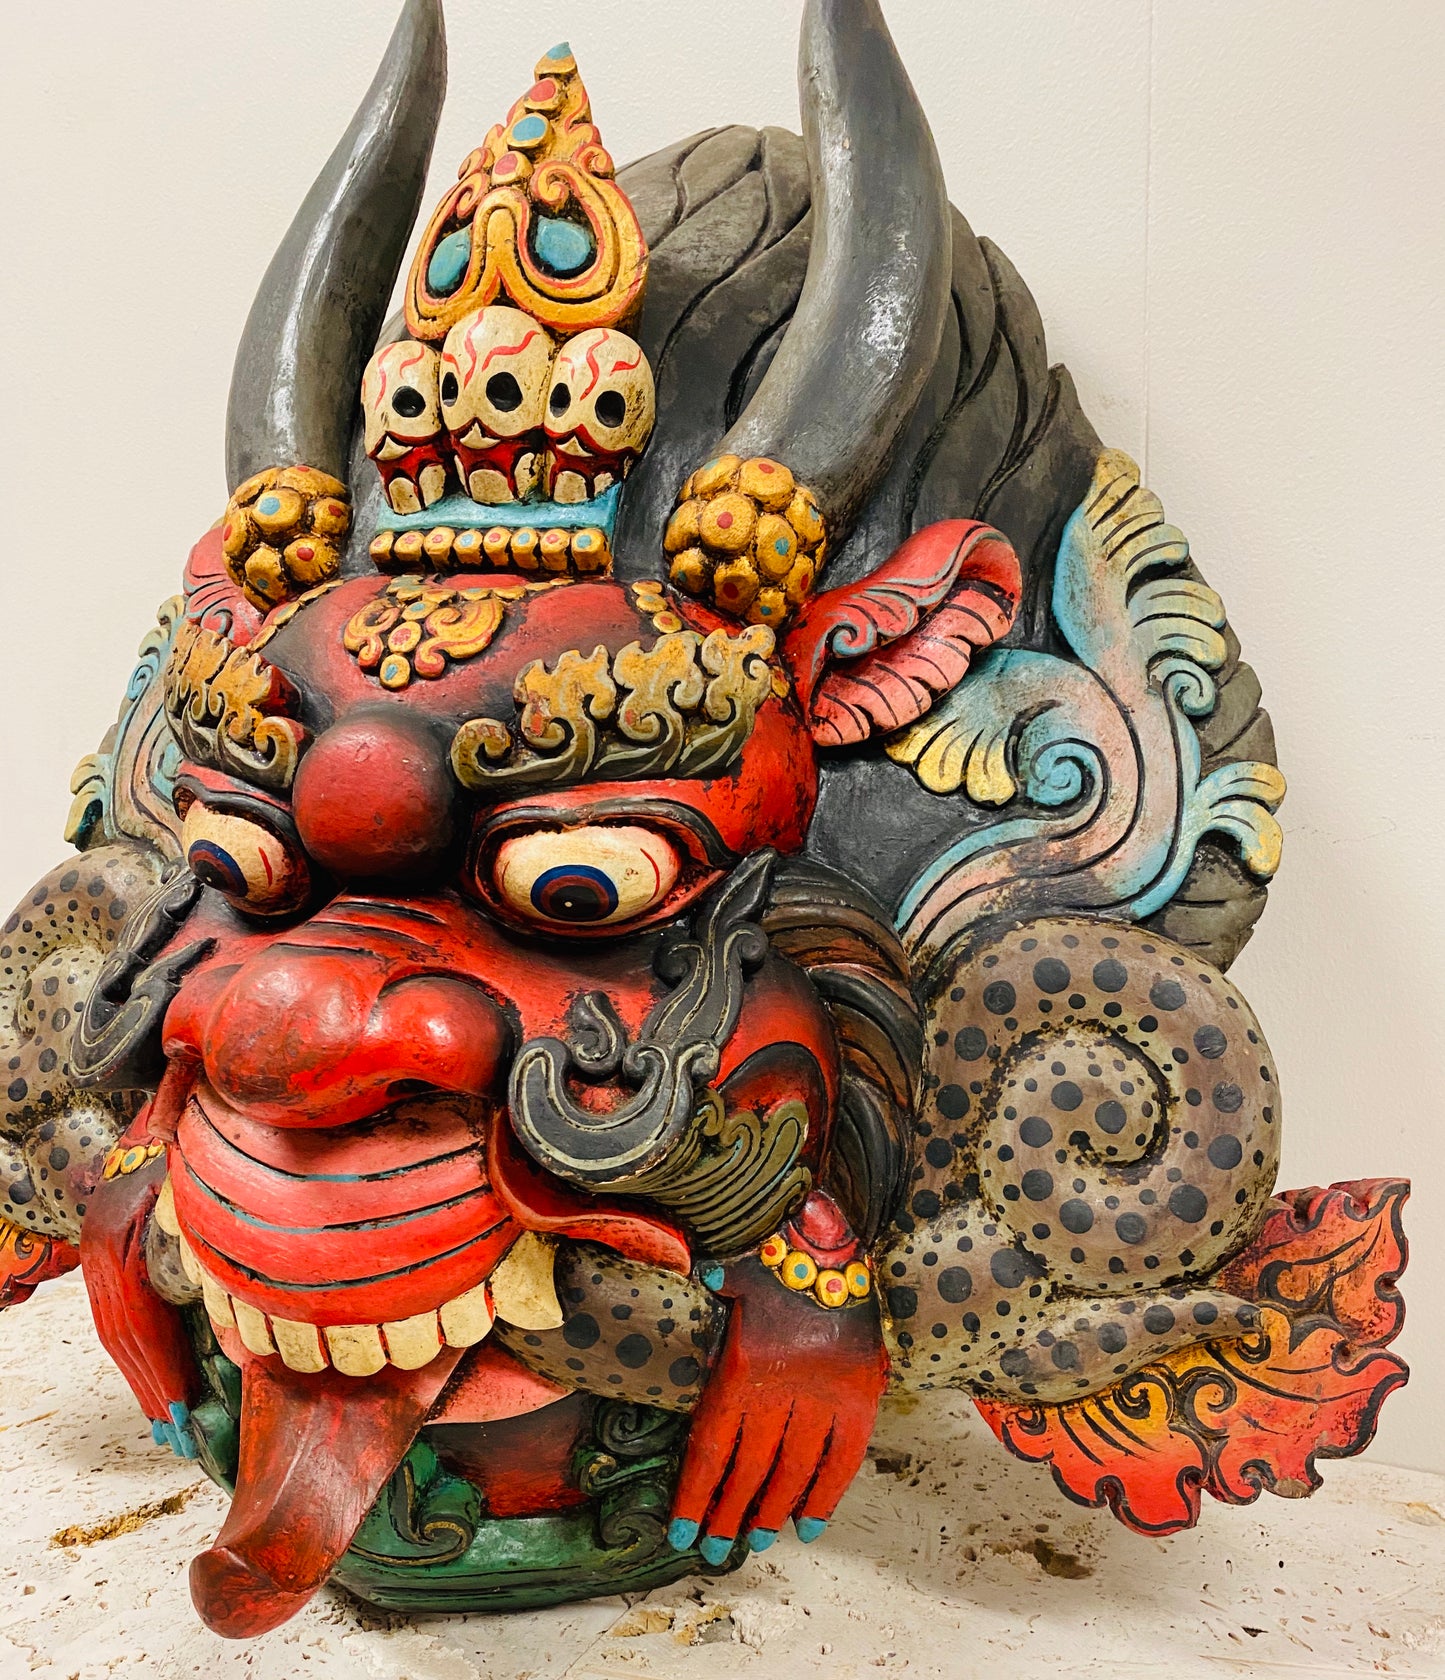 Hand Carved and Painted Cheppu Masks from Nepal 24" x 23"